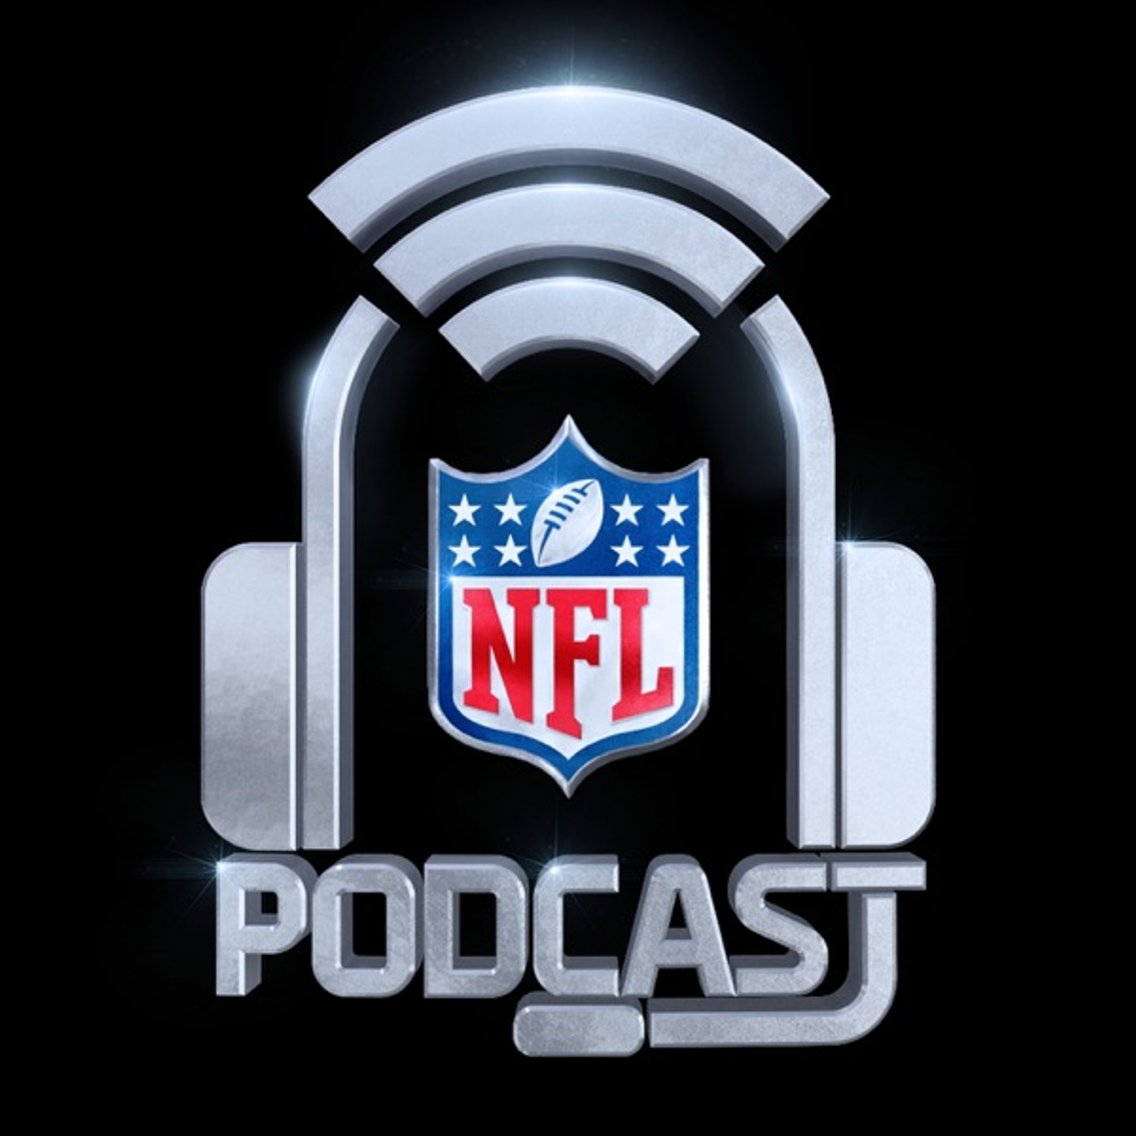 NFL PODCAST - Cover Image